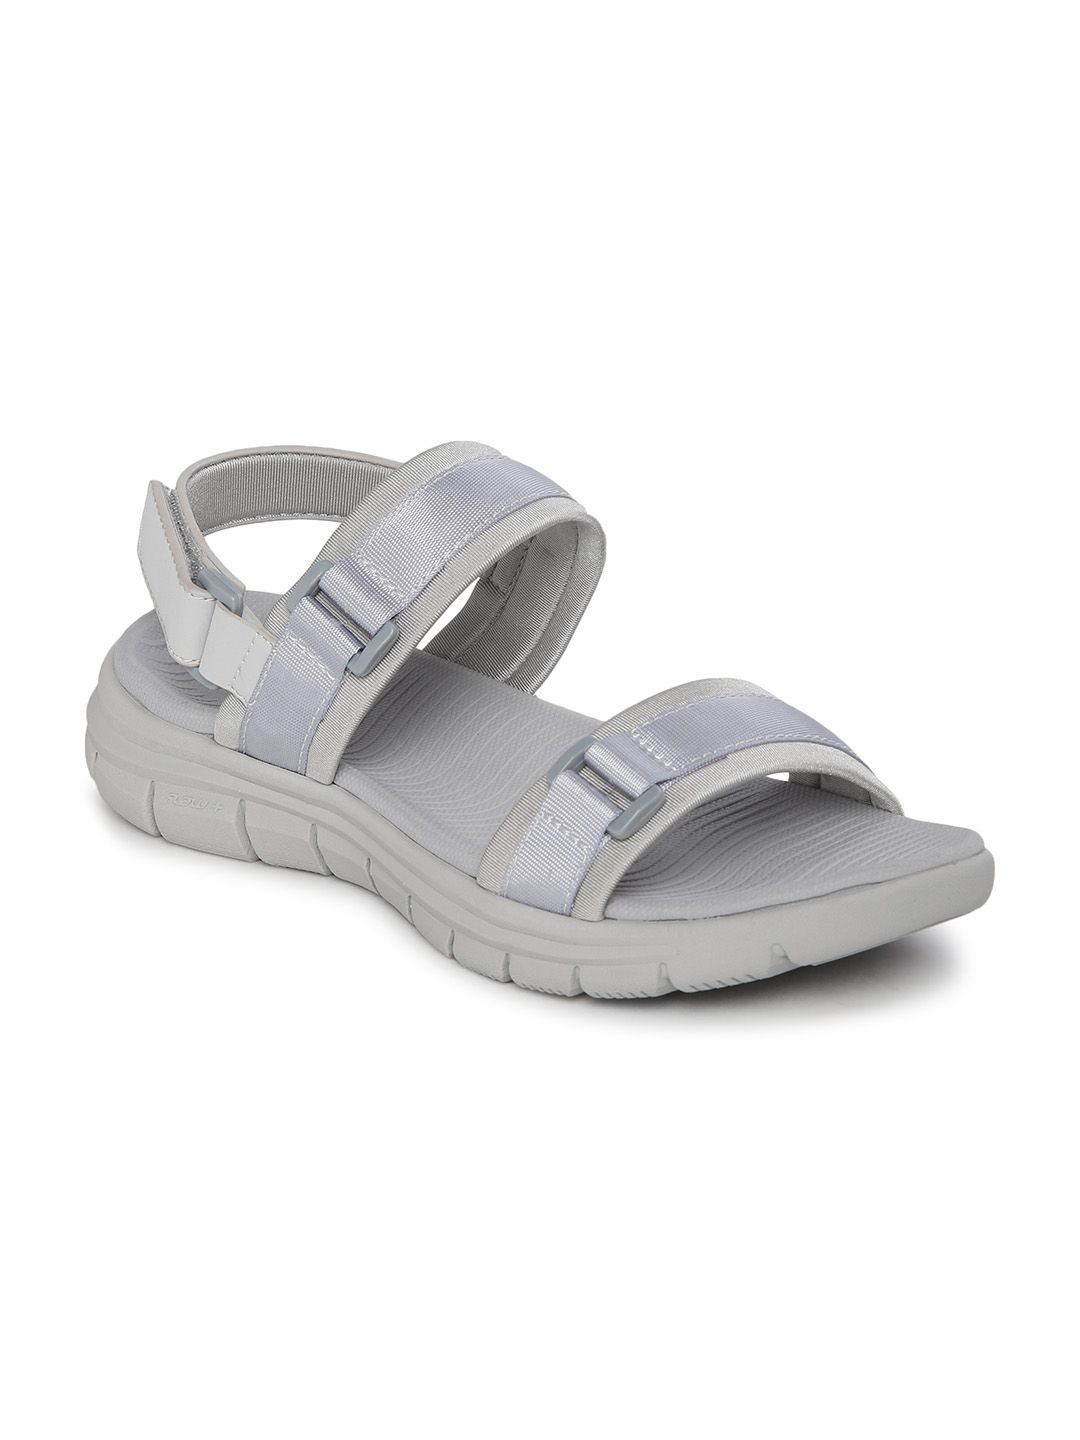 Red Tape Women Grey Solid Sports Sandals Price in India